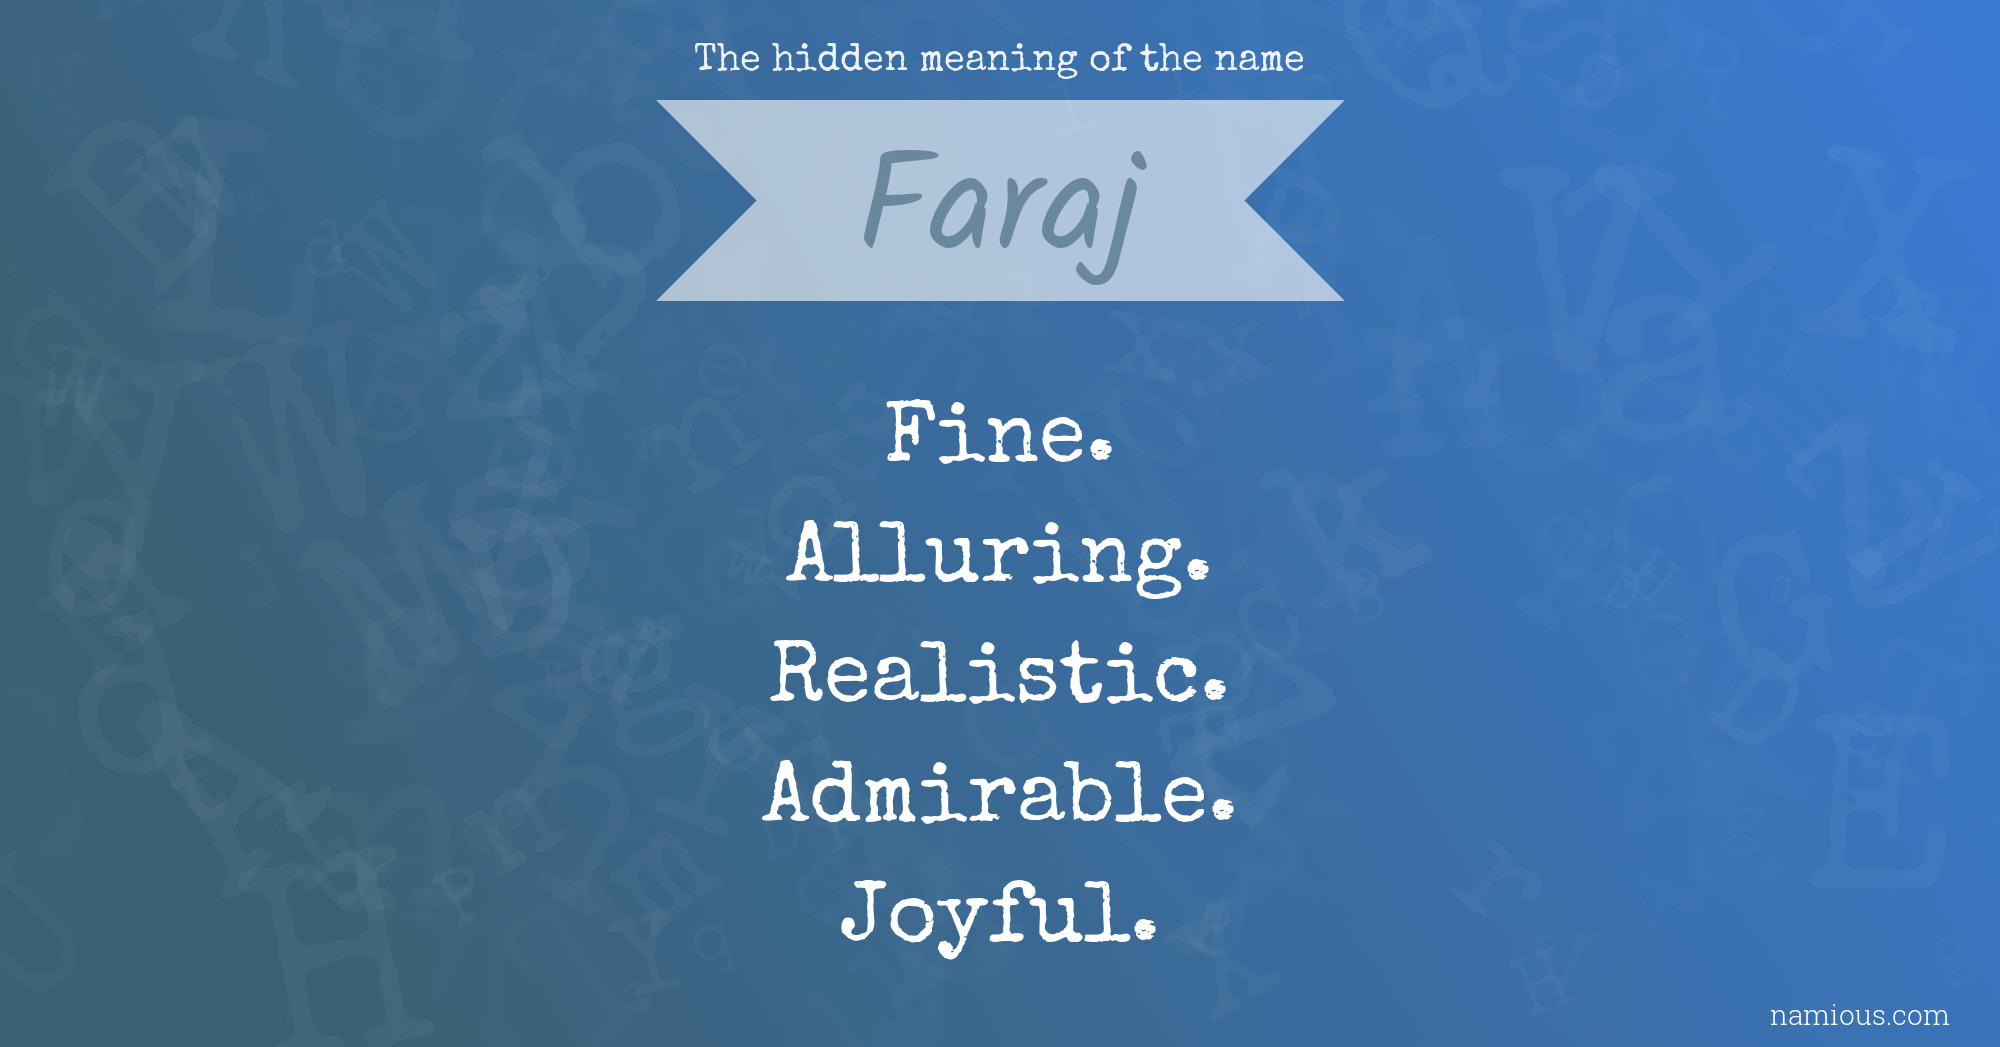 The hidden meaning of the name Faraj